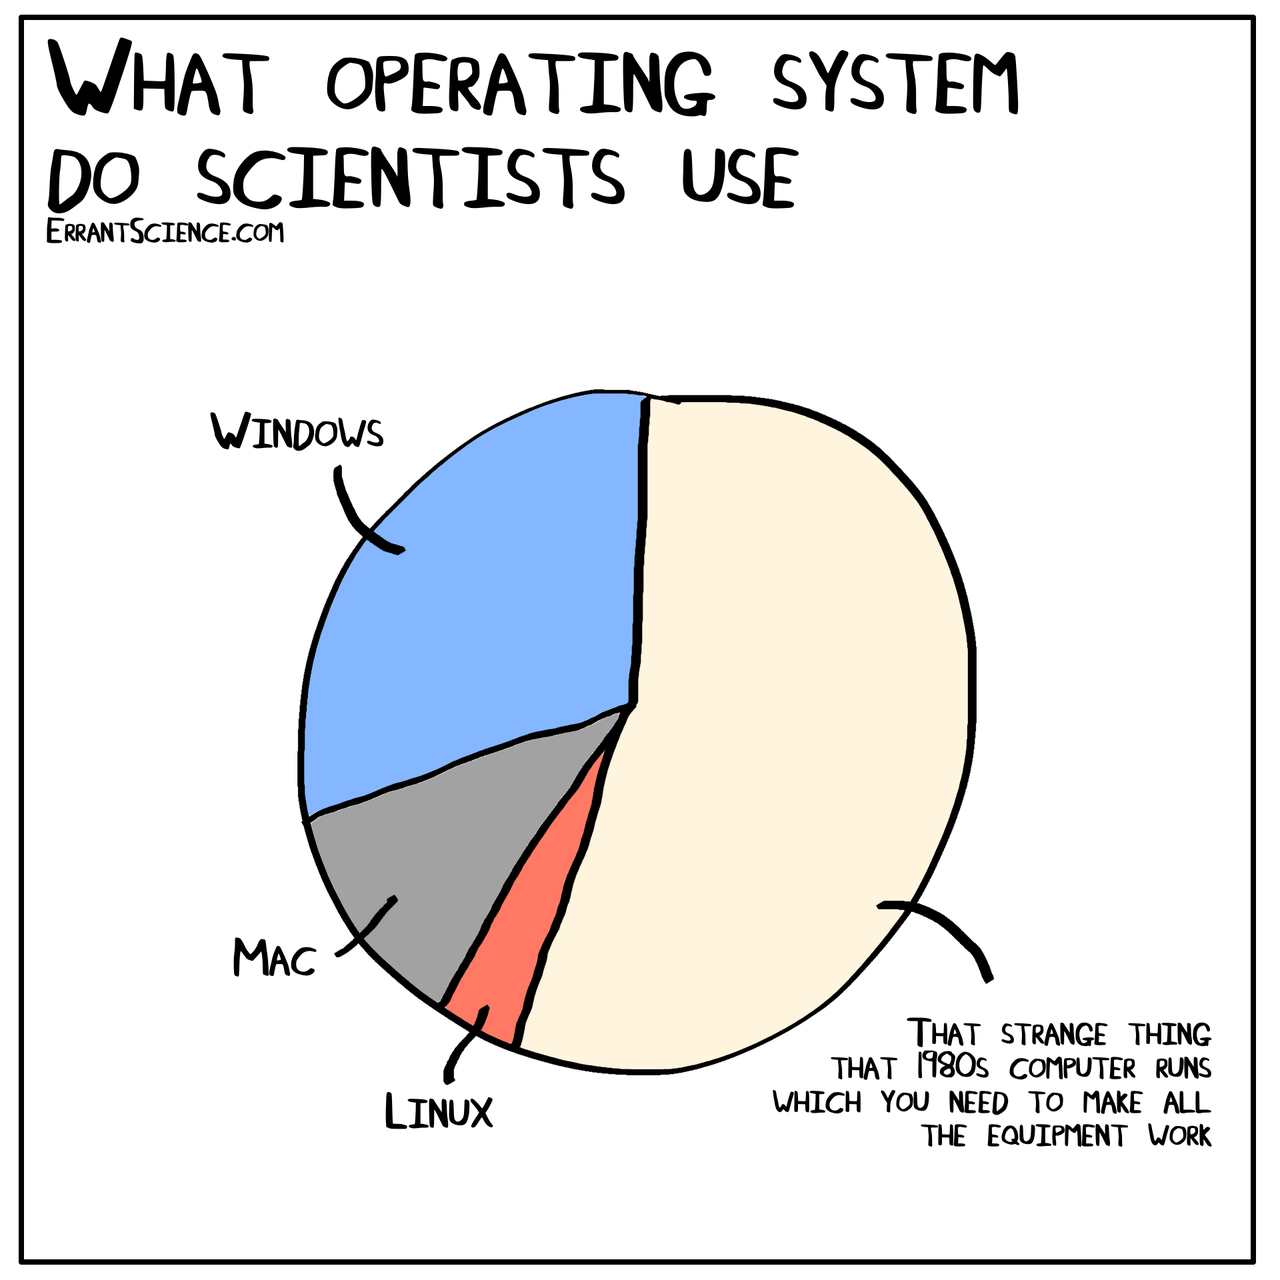 Pie chart showing which operating system scientists use (joke)